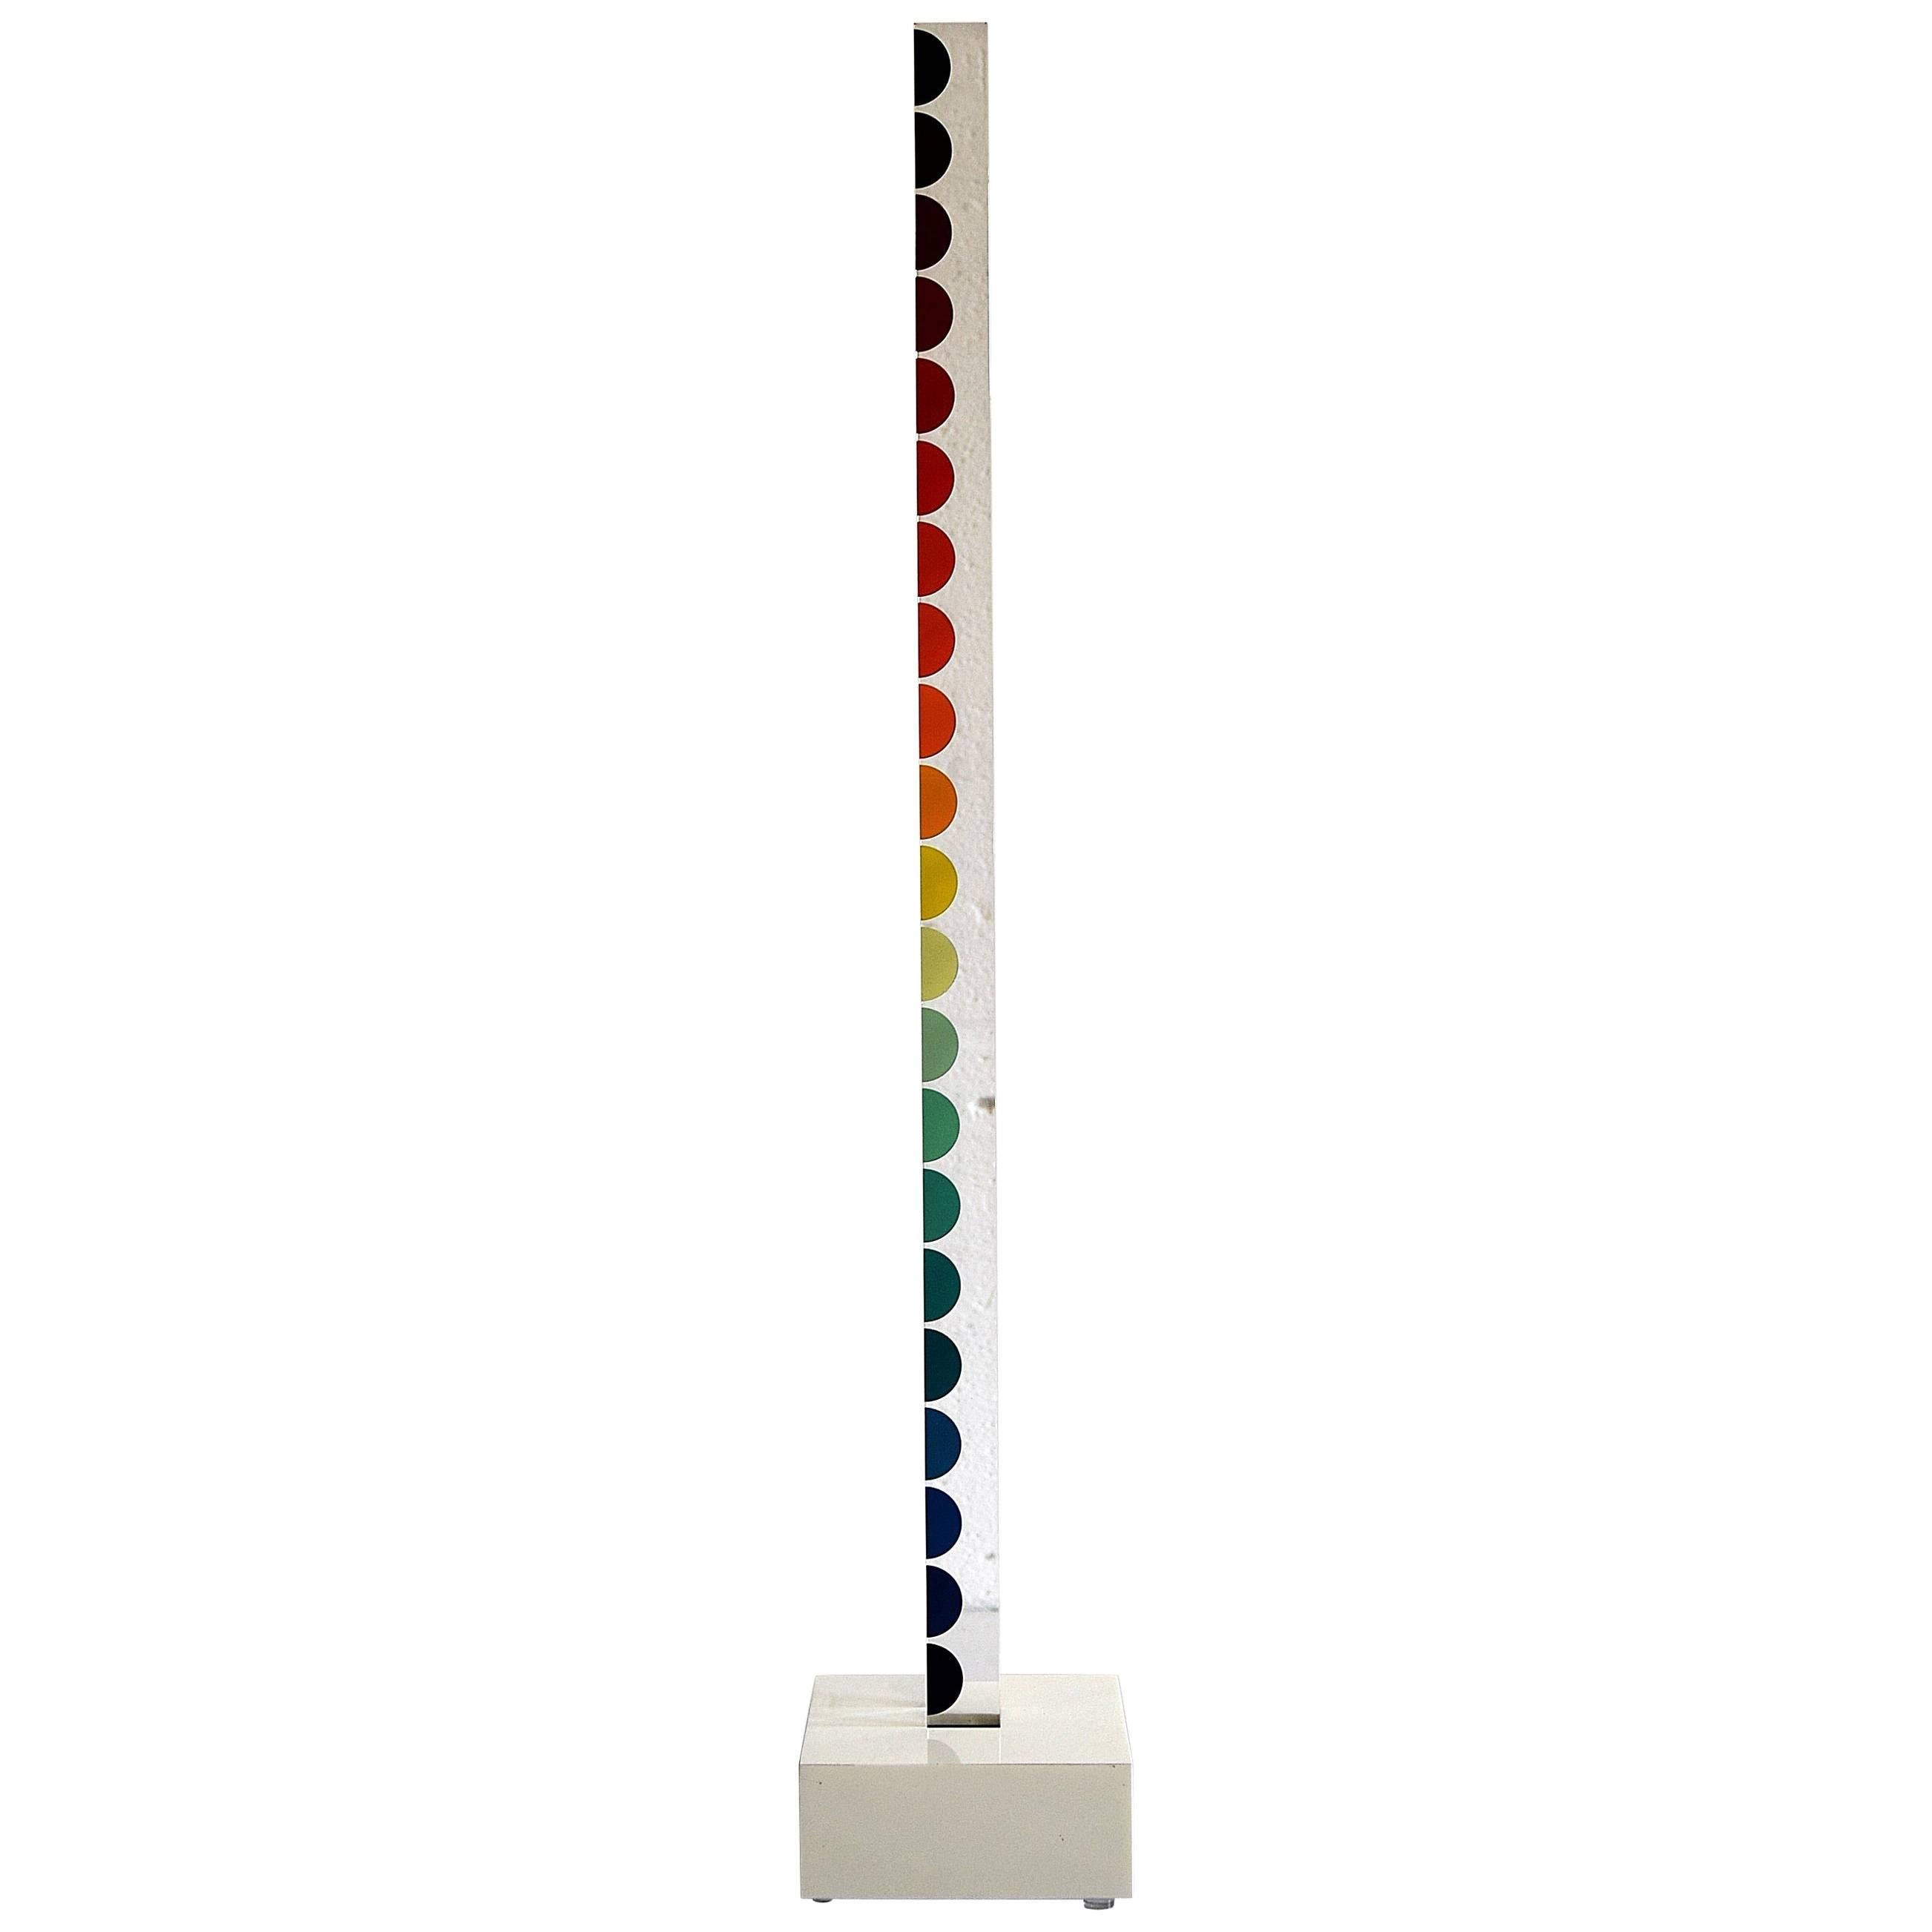 Art Sculpture by Yaacov Agam For Sale